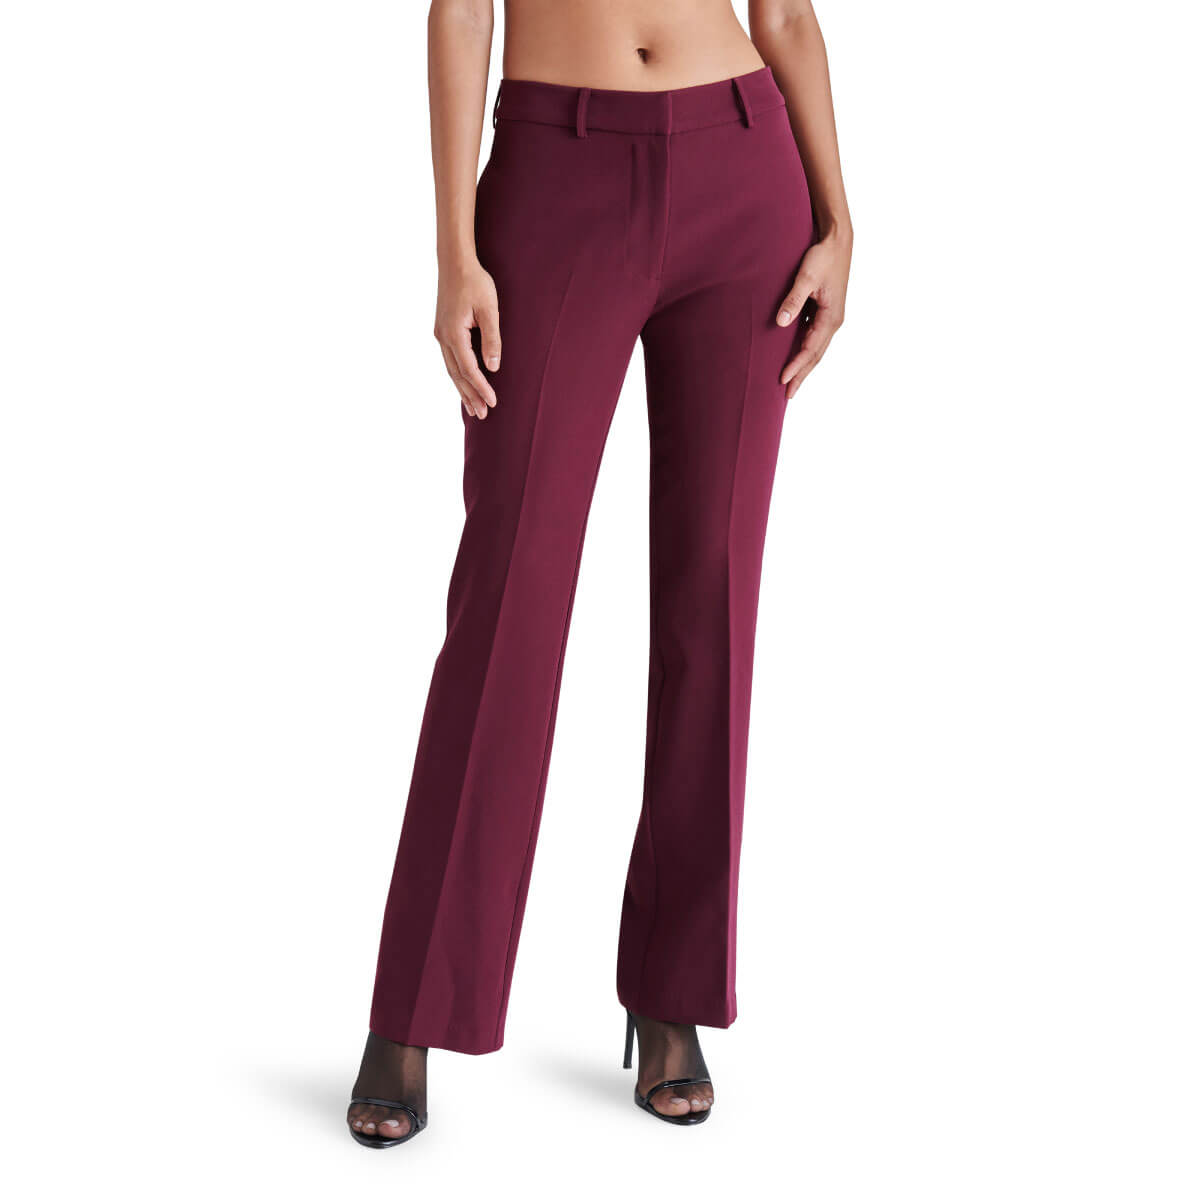 Steve Madden Waverly Pants fig front | MILK MONEY milkmoney.co | cute clothes for women. womens online clothing. trendy online clothing stores. womens casual clothing online. trendy clothes online. trendy women's clothing online. ladies online clothing stores. trendy women's clothing stores. cute female clothes.